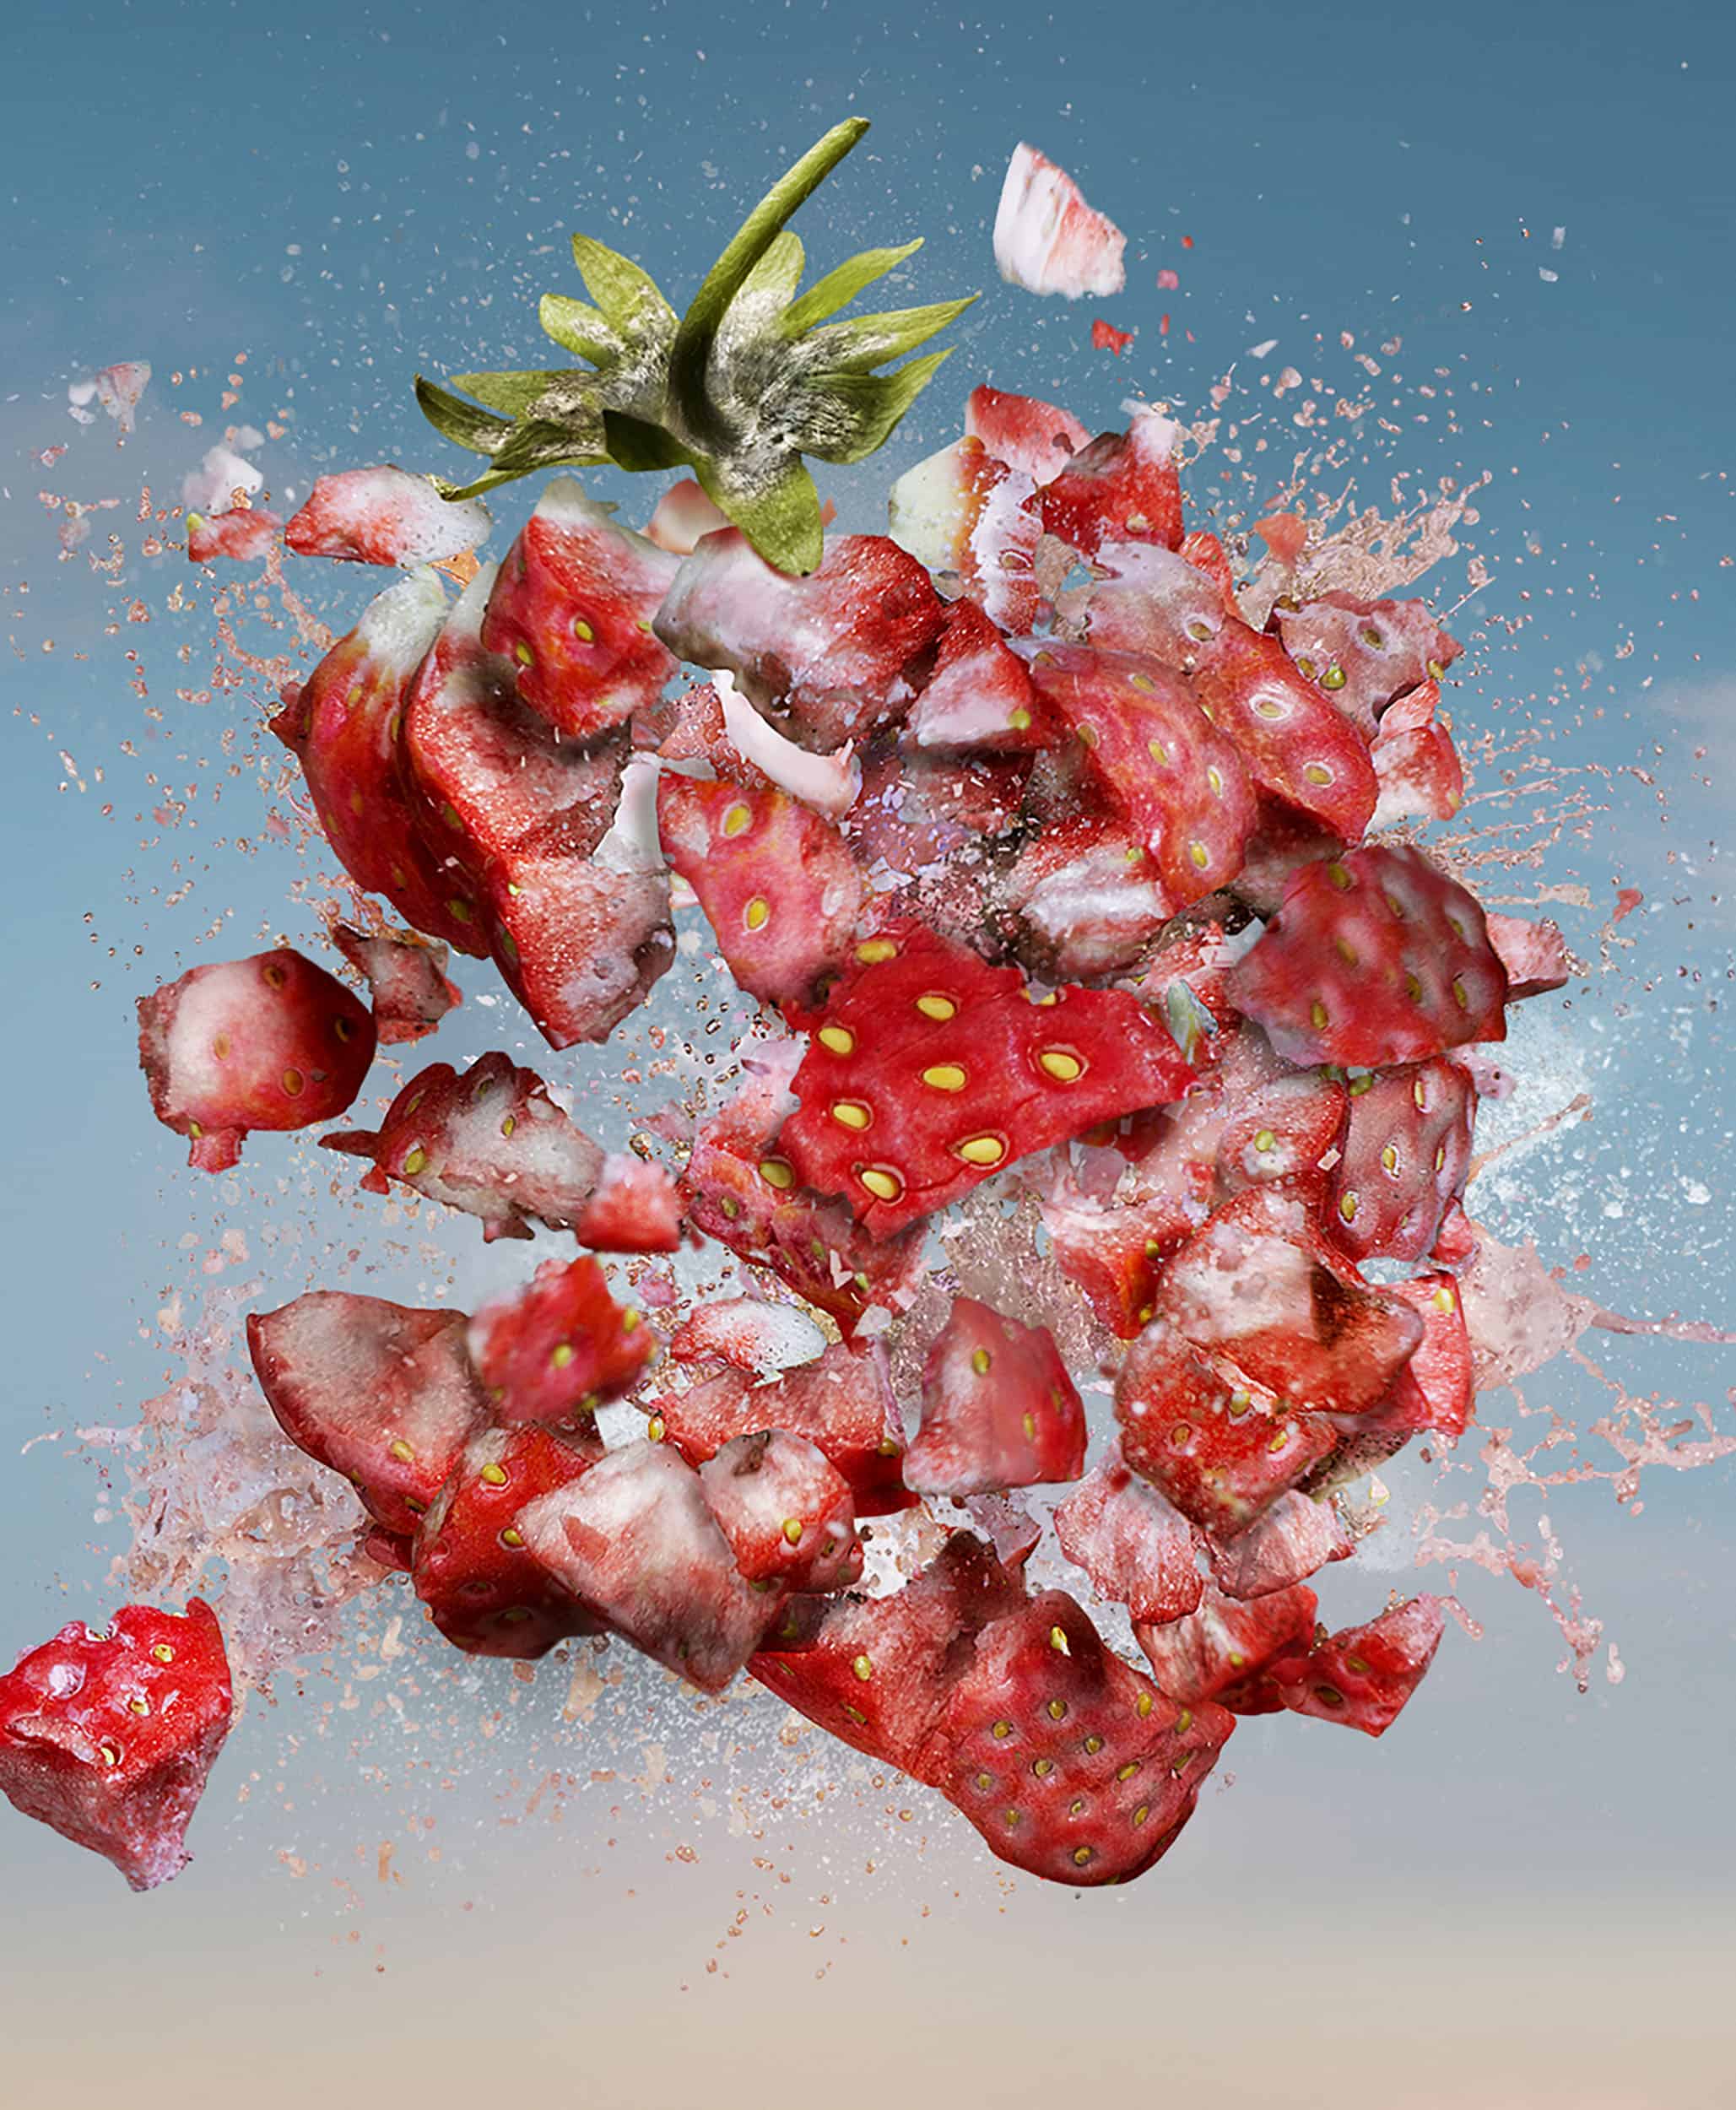 Strawberry exploding in mid air